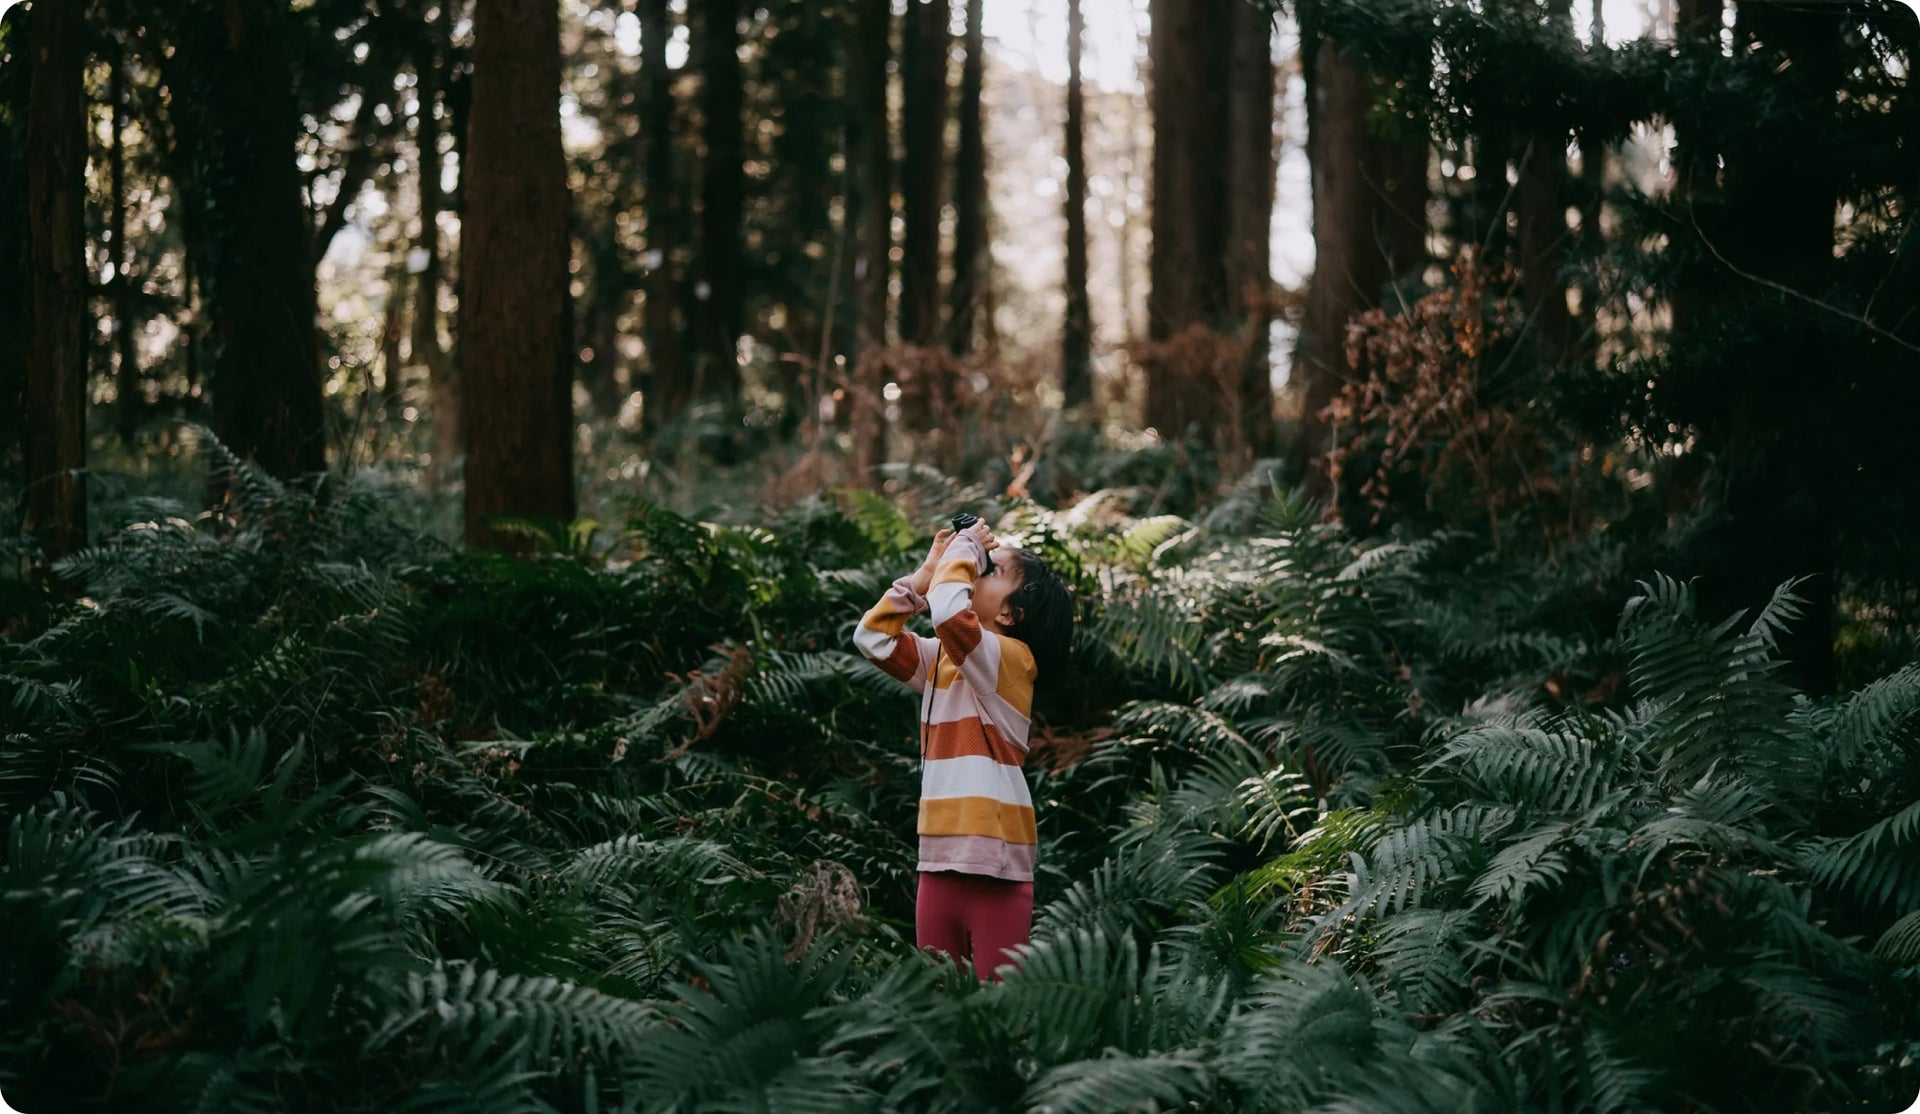 A young child in the forest